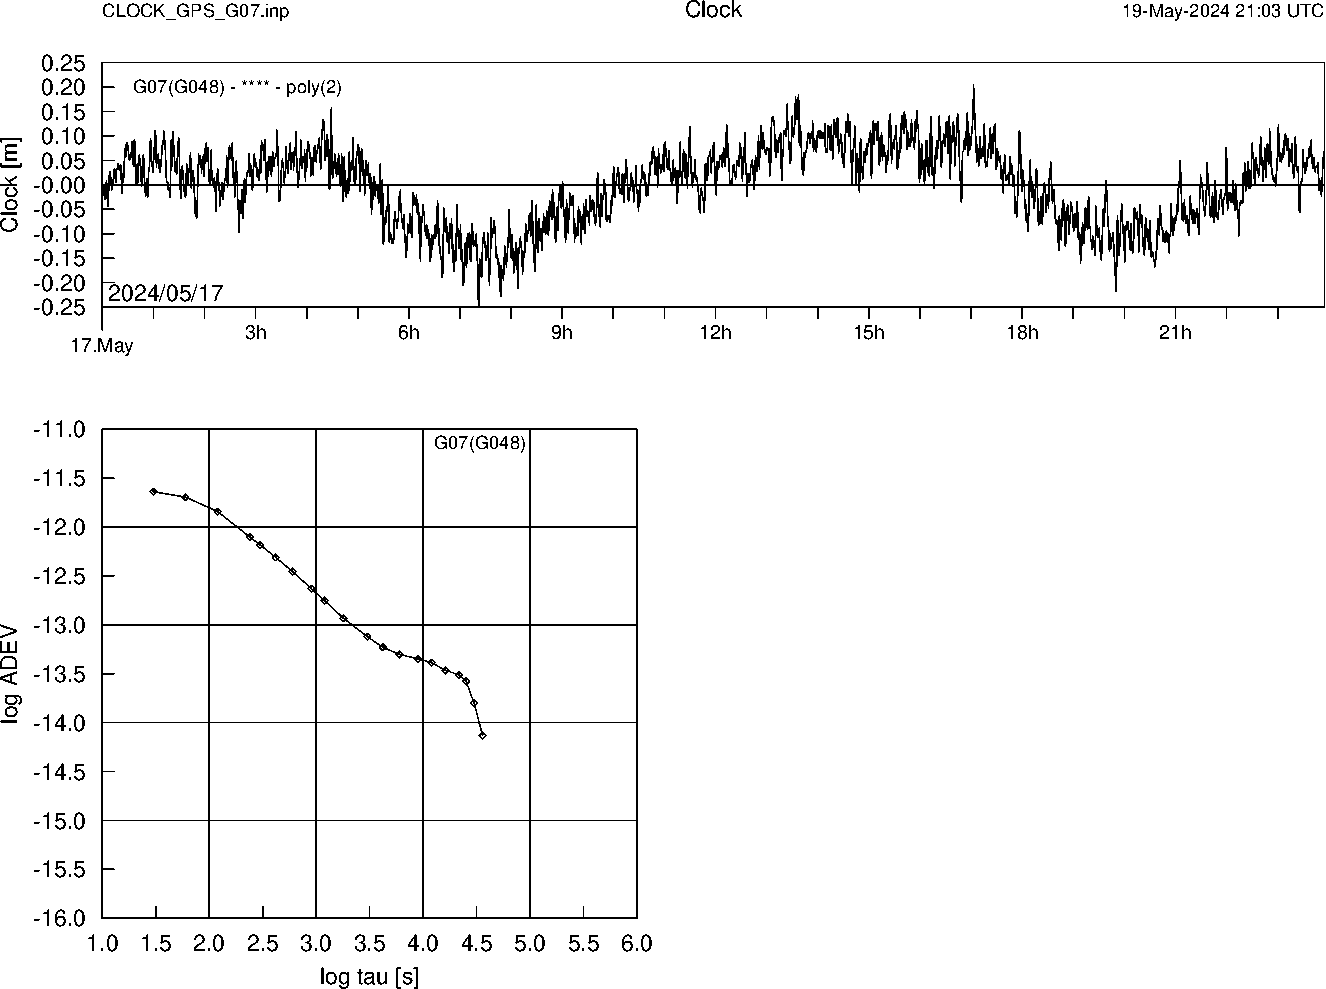 GPS G07 Clock Time Series and Allan Deviation